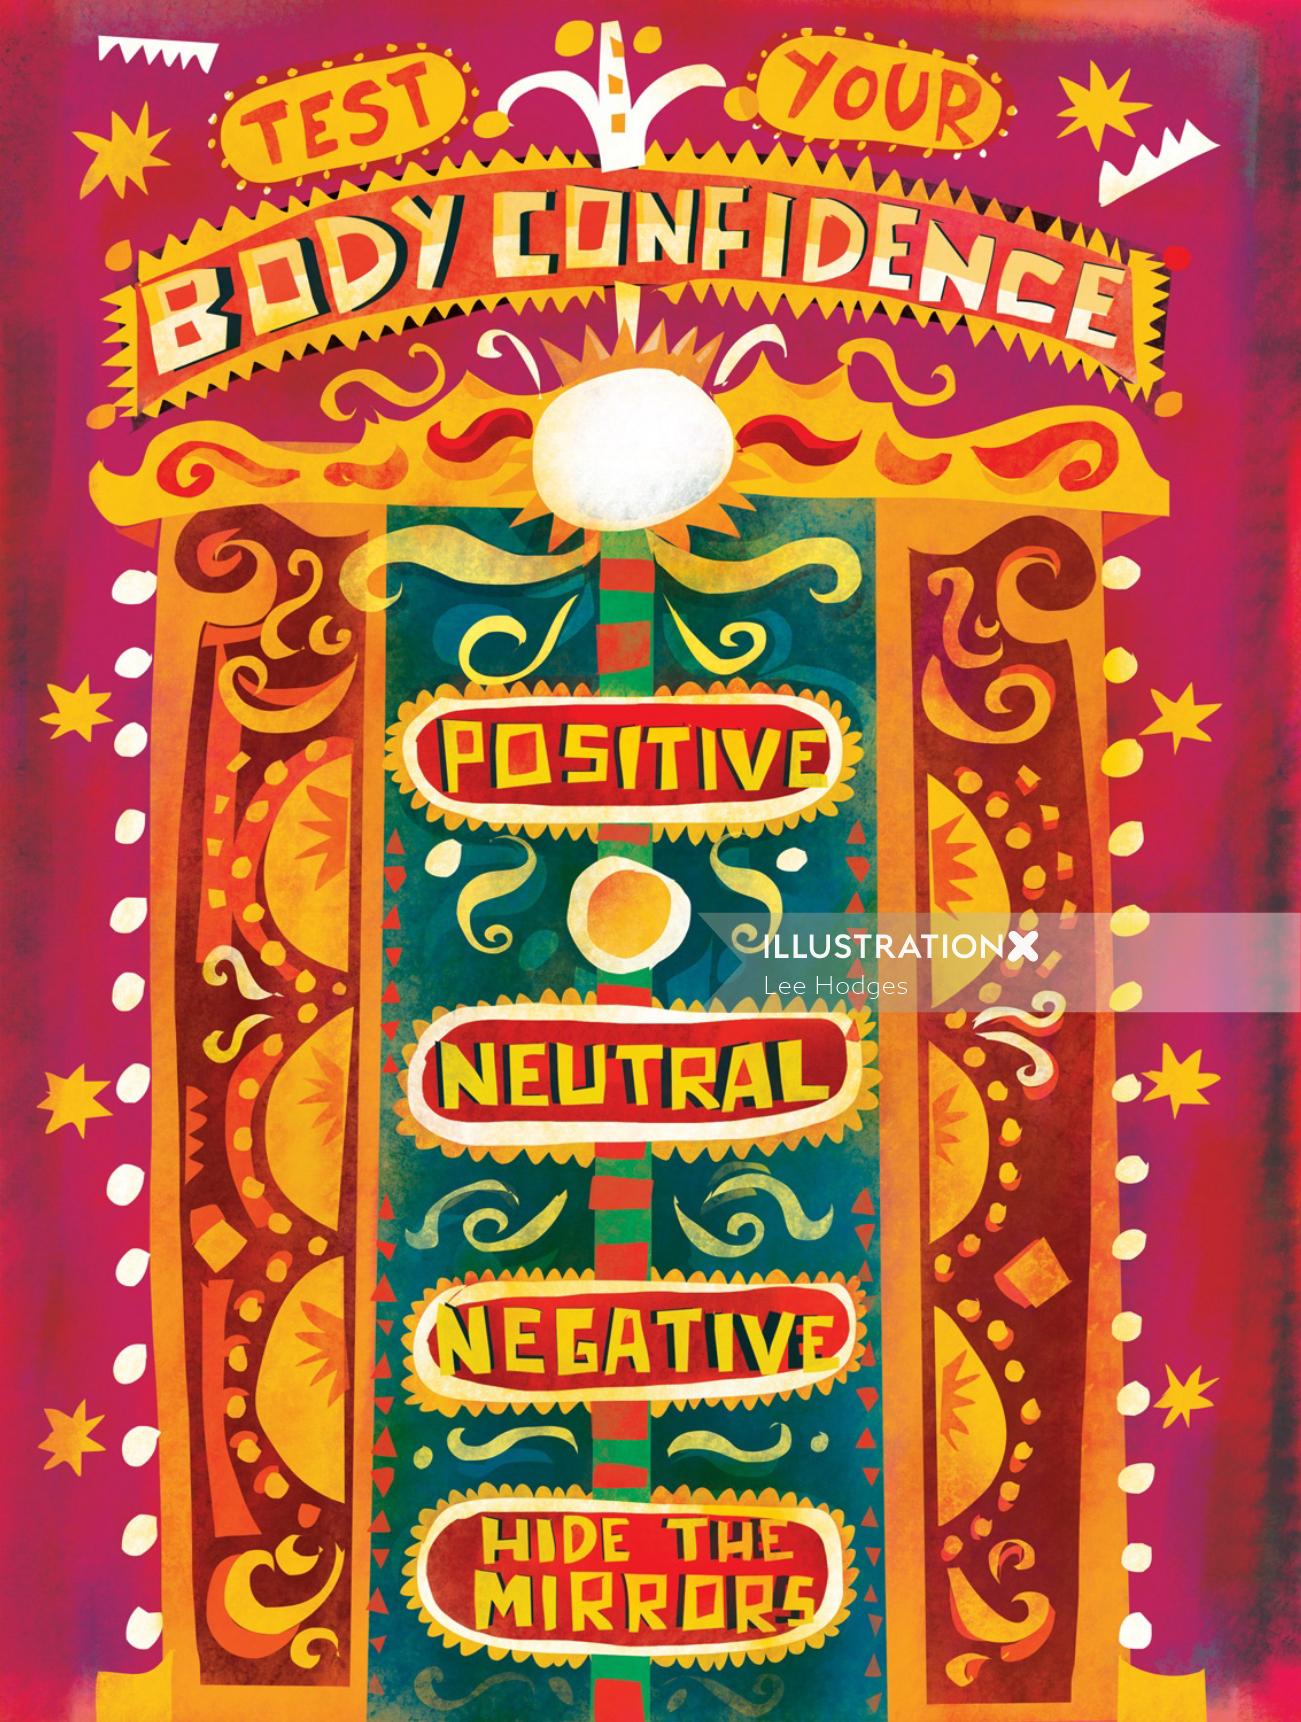 Editorial illustration of body confidence for Women's Health magazine